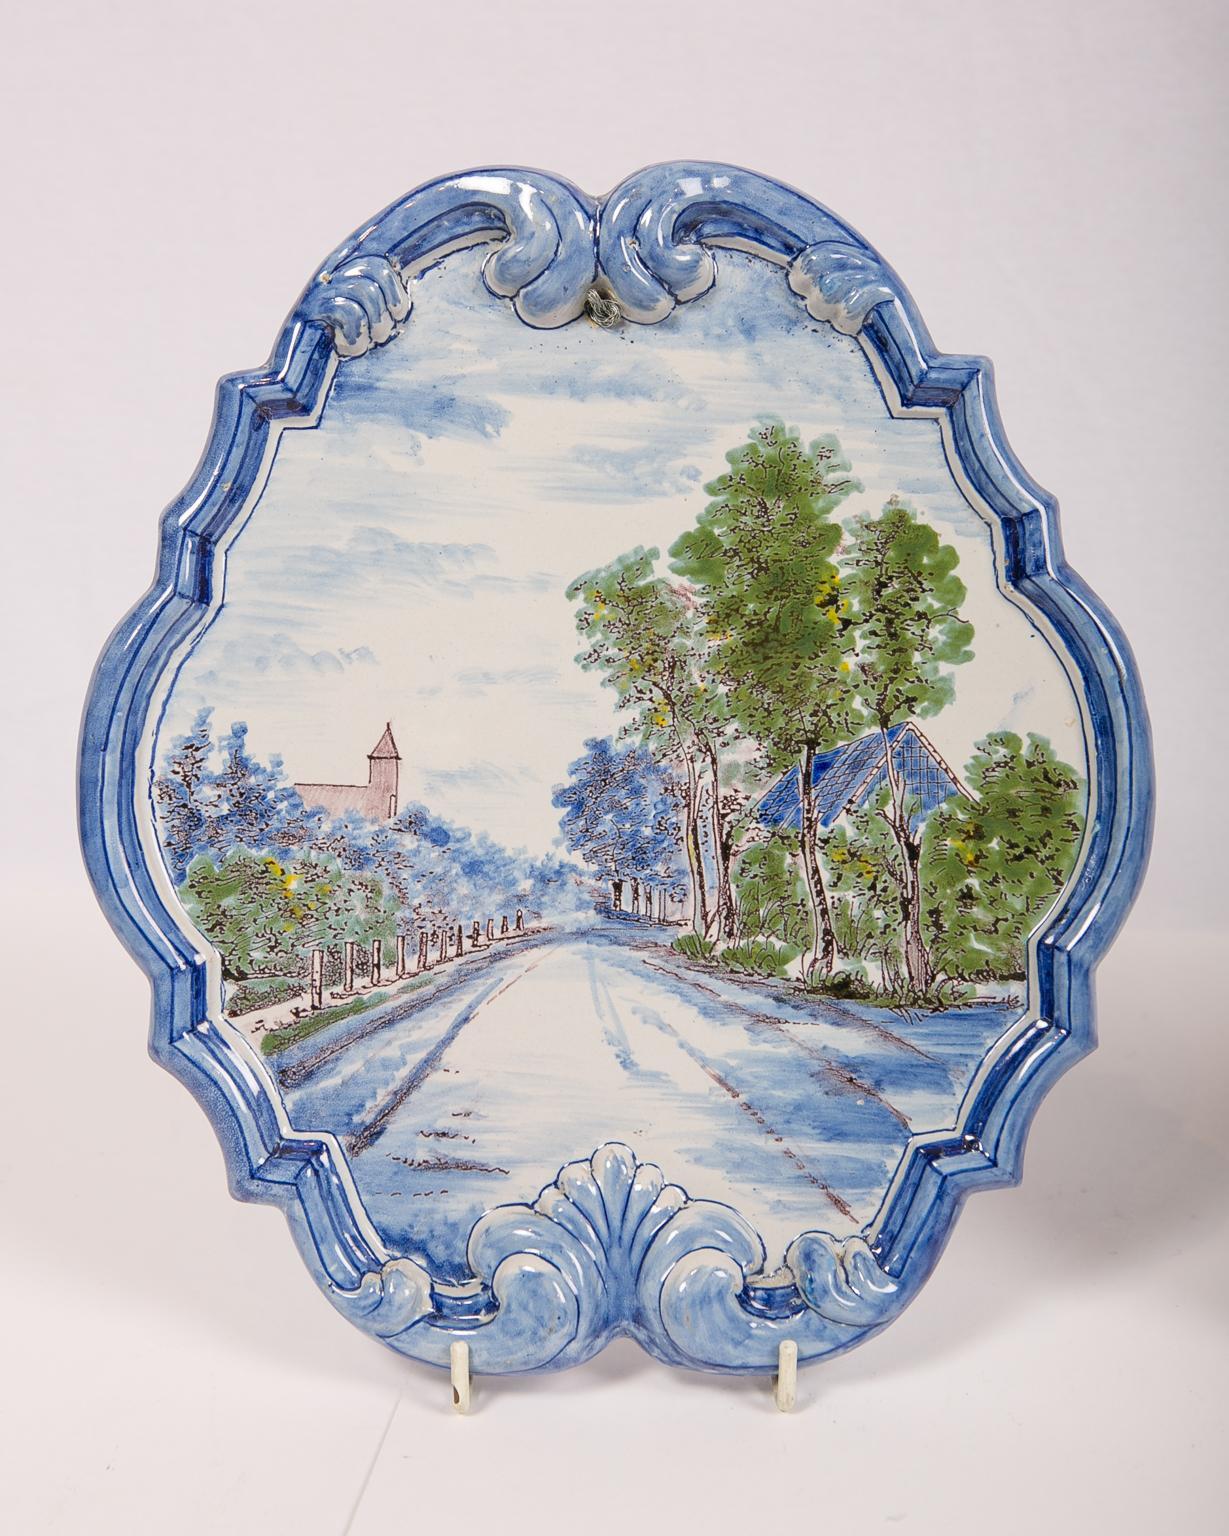 A pair of Dutch delft wall plaques with blue raised borders each plaque showing a peaceful Dutch village scene; one shows a town from the waterfront with a towering church steeple and birds flying overhead: the other shows a long boulevard with